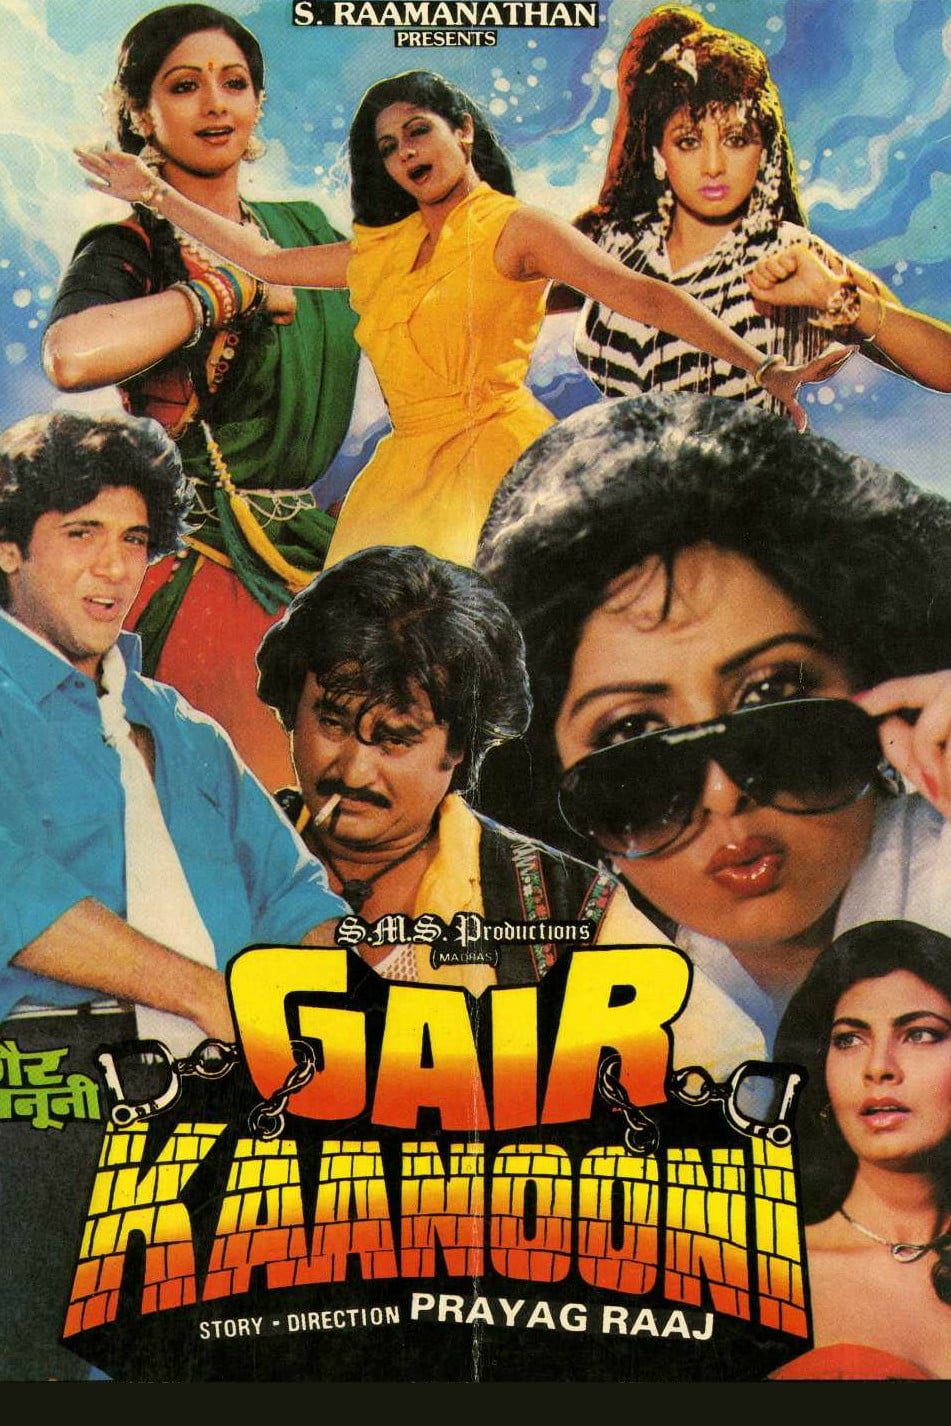 Poster for the movie "Gair Kanooni"